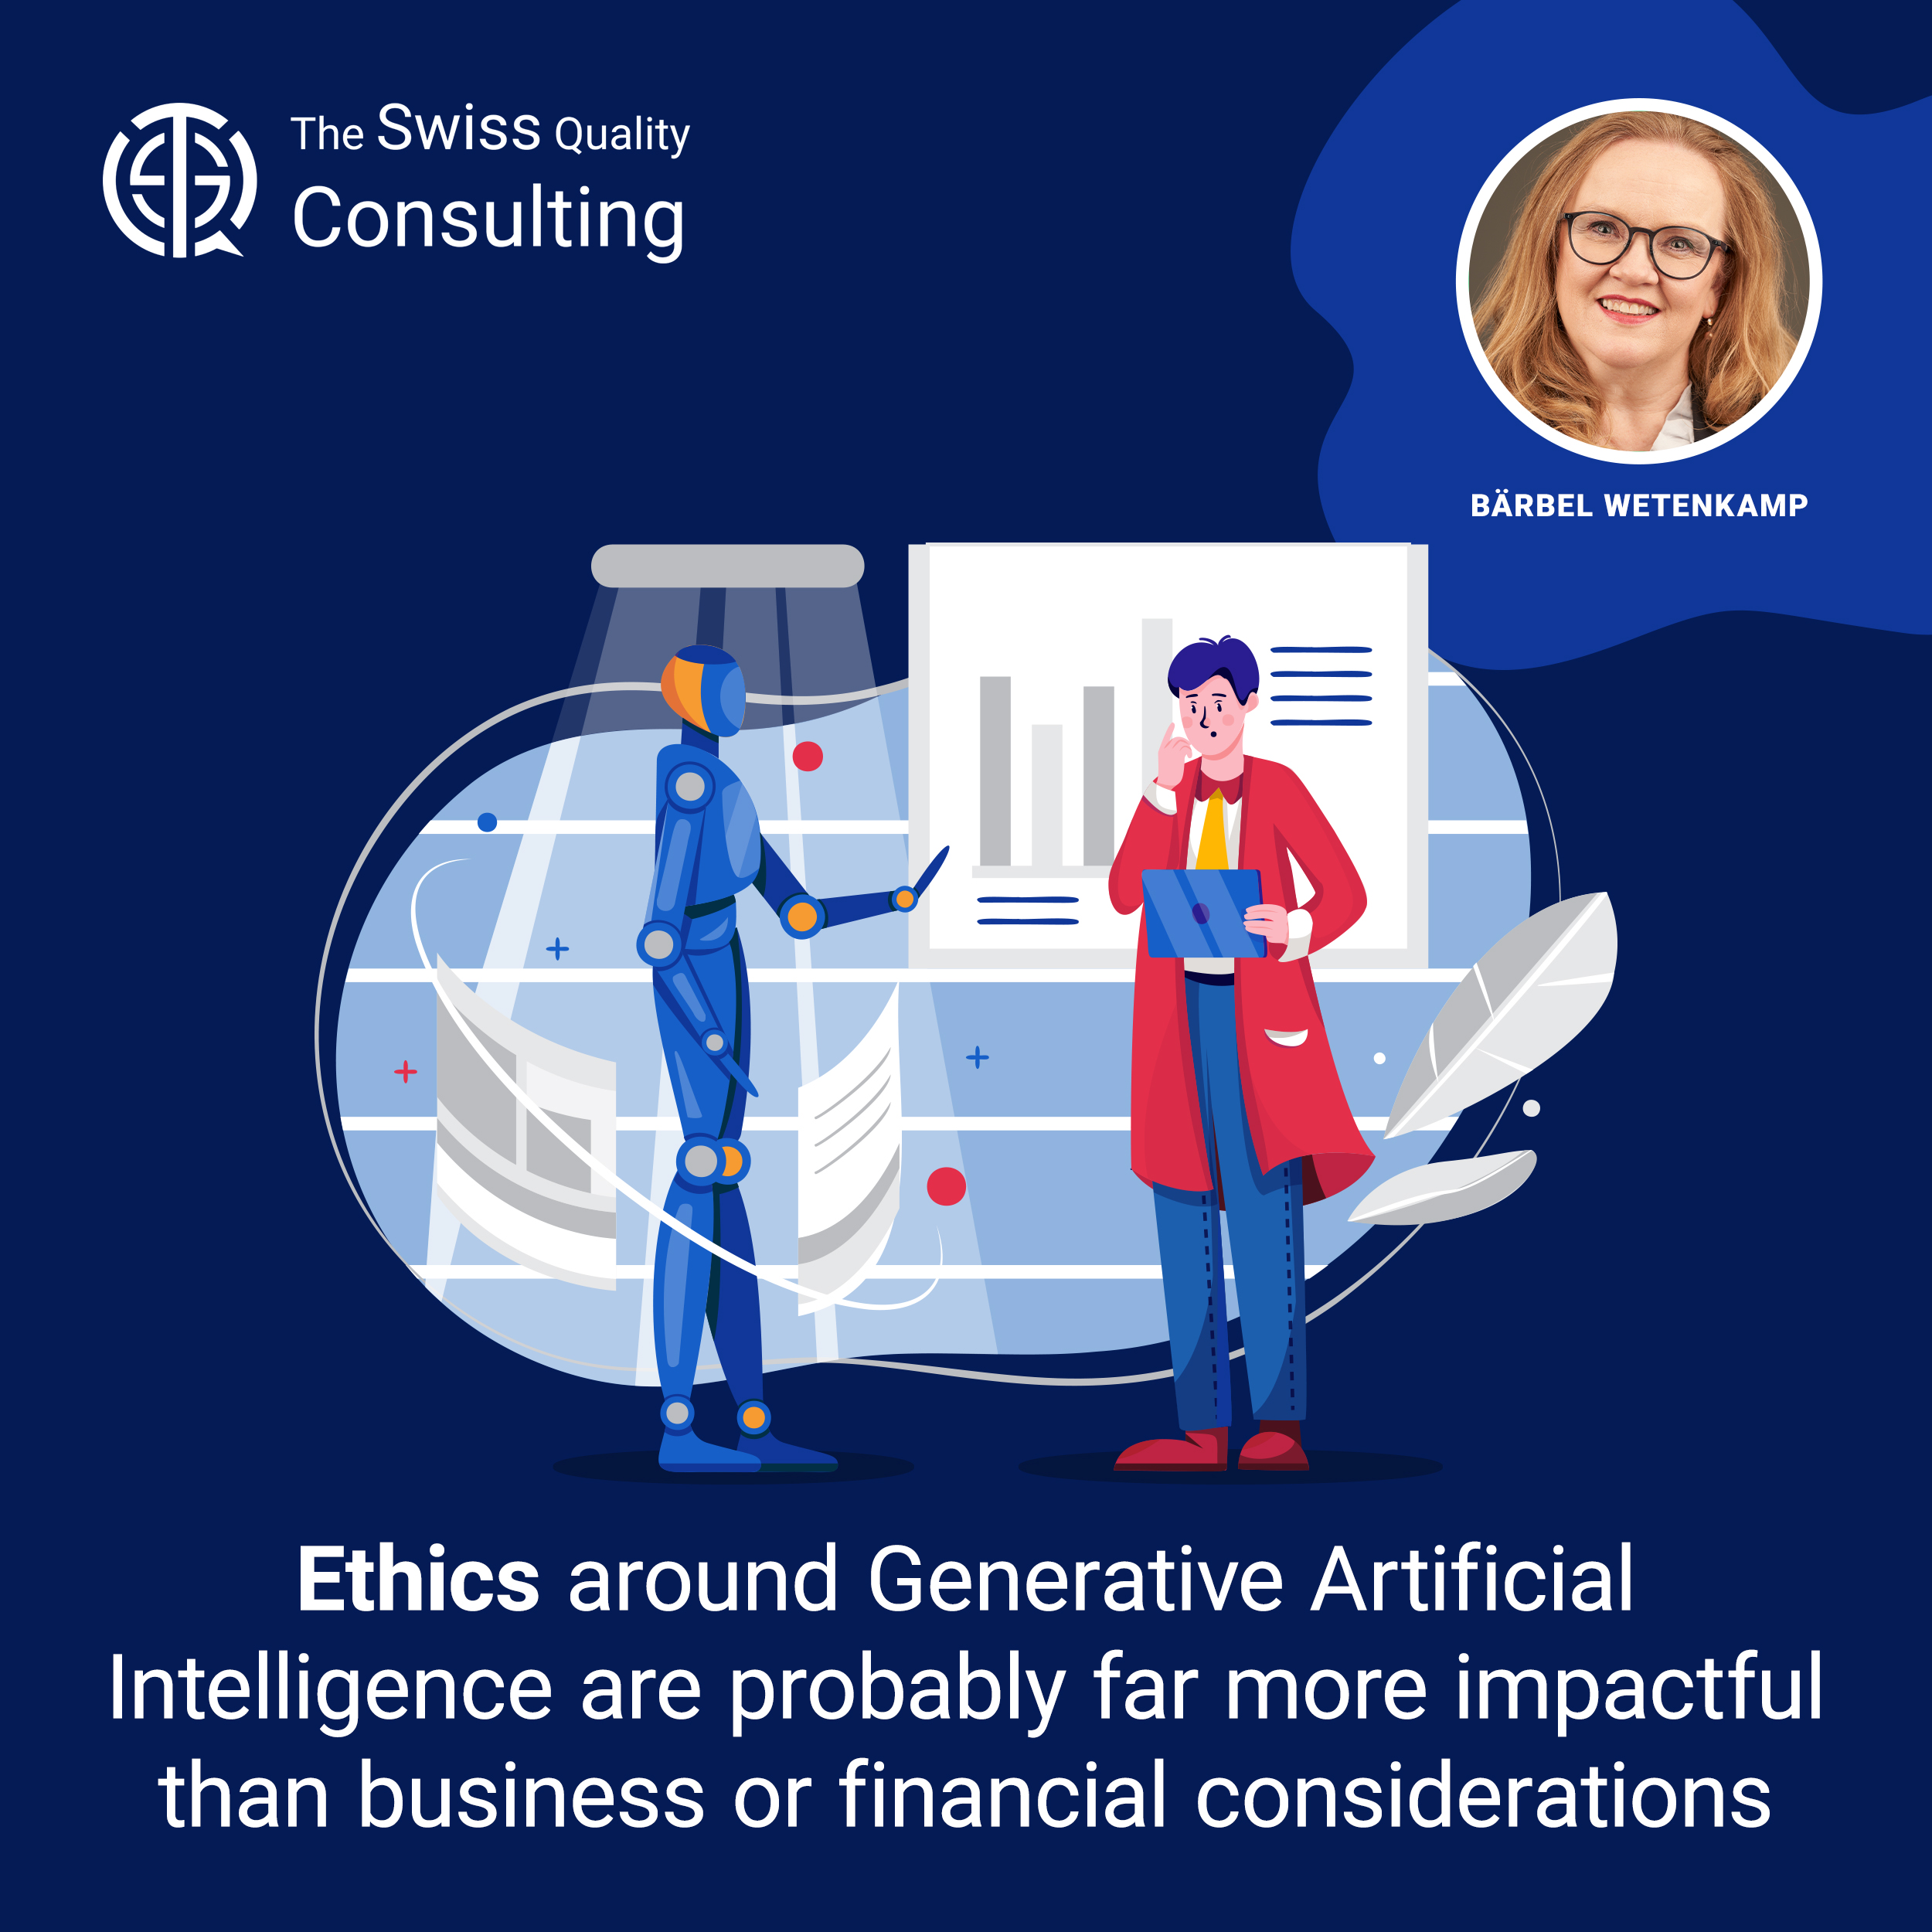 Ethics around Generative Artificial Intelligence are probably far more impactful than business or financial considerations